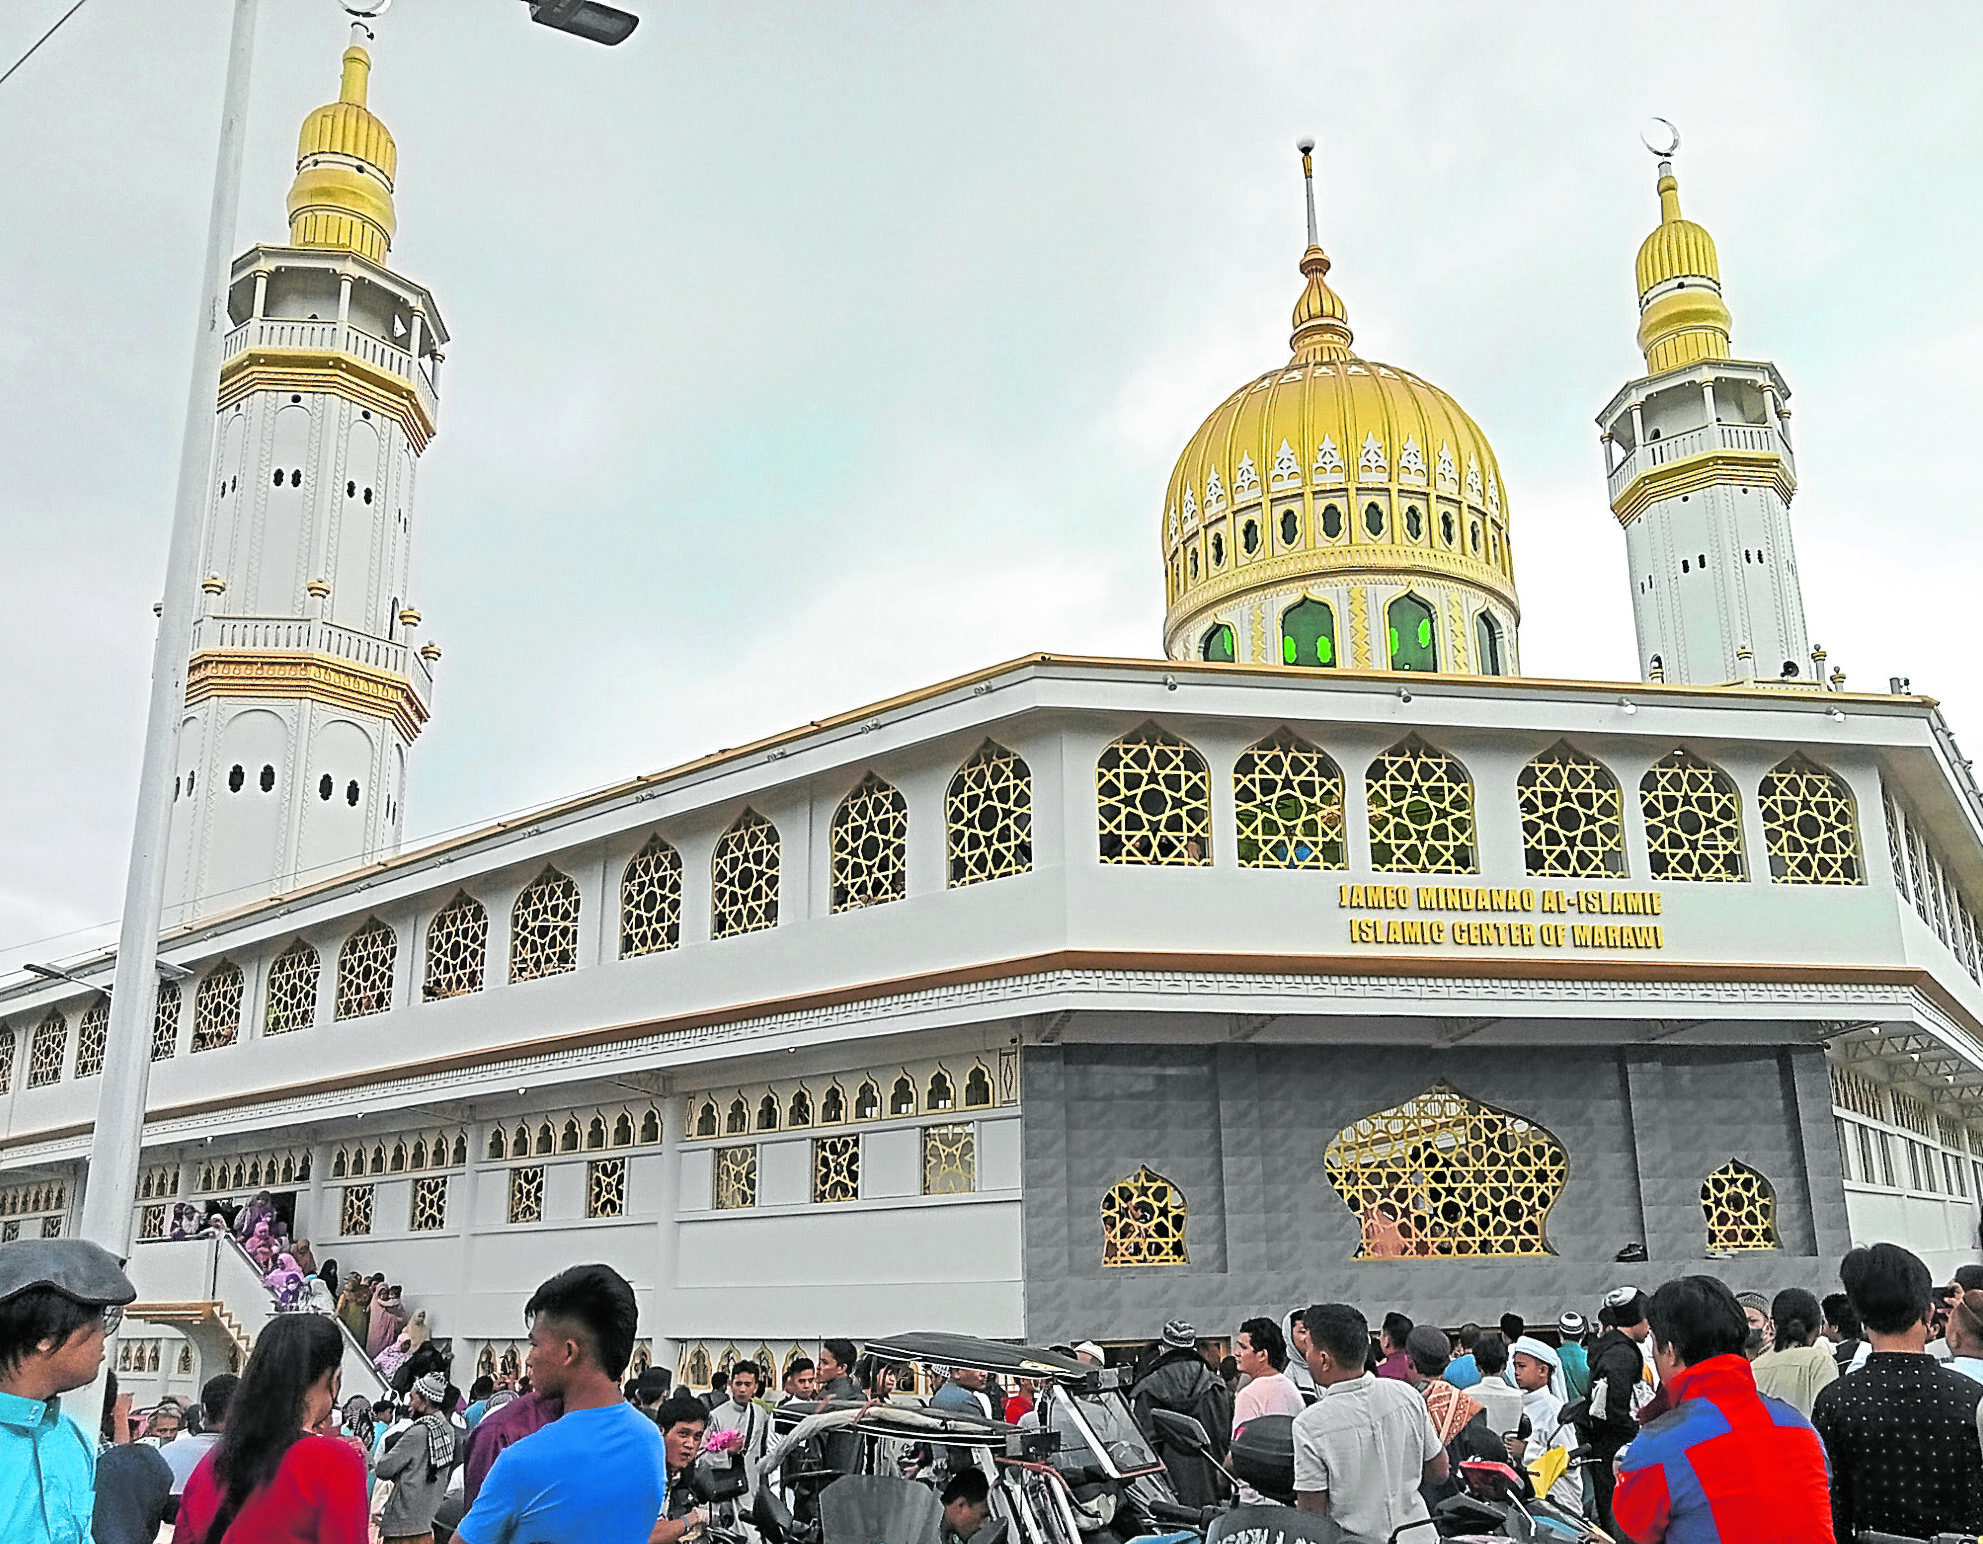 KEEPING THE FAITH For the first time since the 2017 siege of Marawi, Maranaws were allowed to gather at the Jameo MindanaoAl-Islamie Islamic Center or grand mosque in this photo taken at the end of Ramadan in 2022. —CONTRIBUTED PHOTO